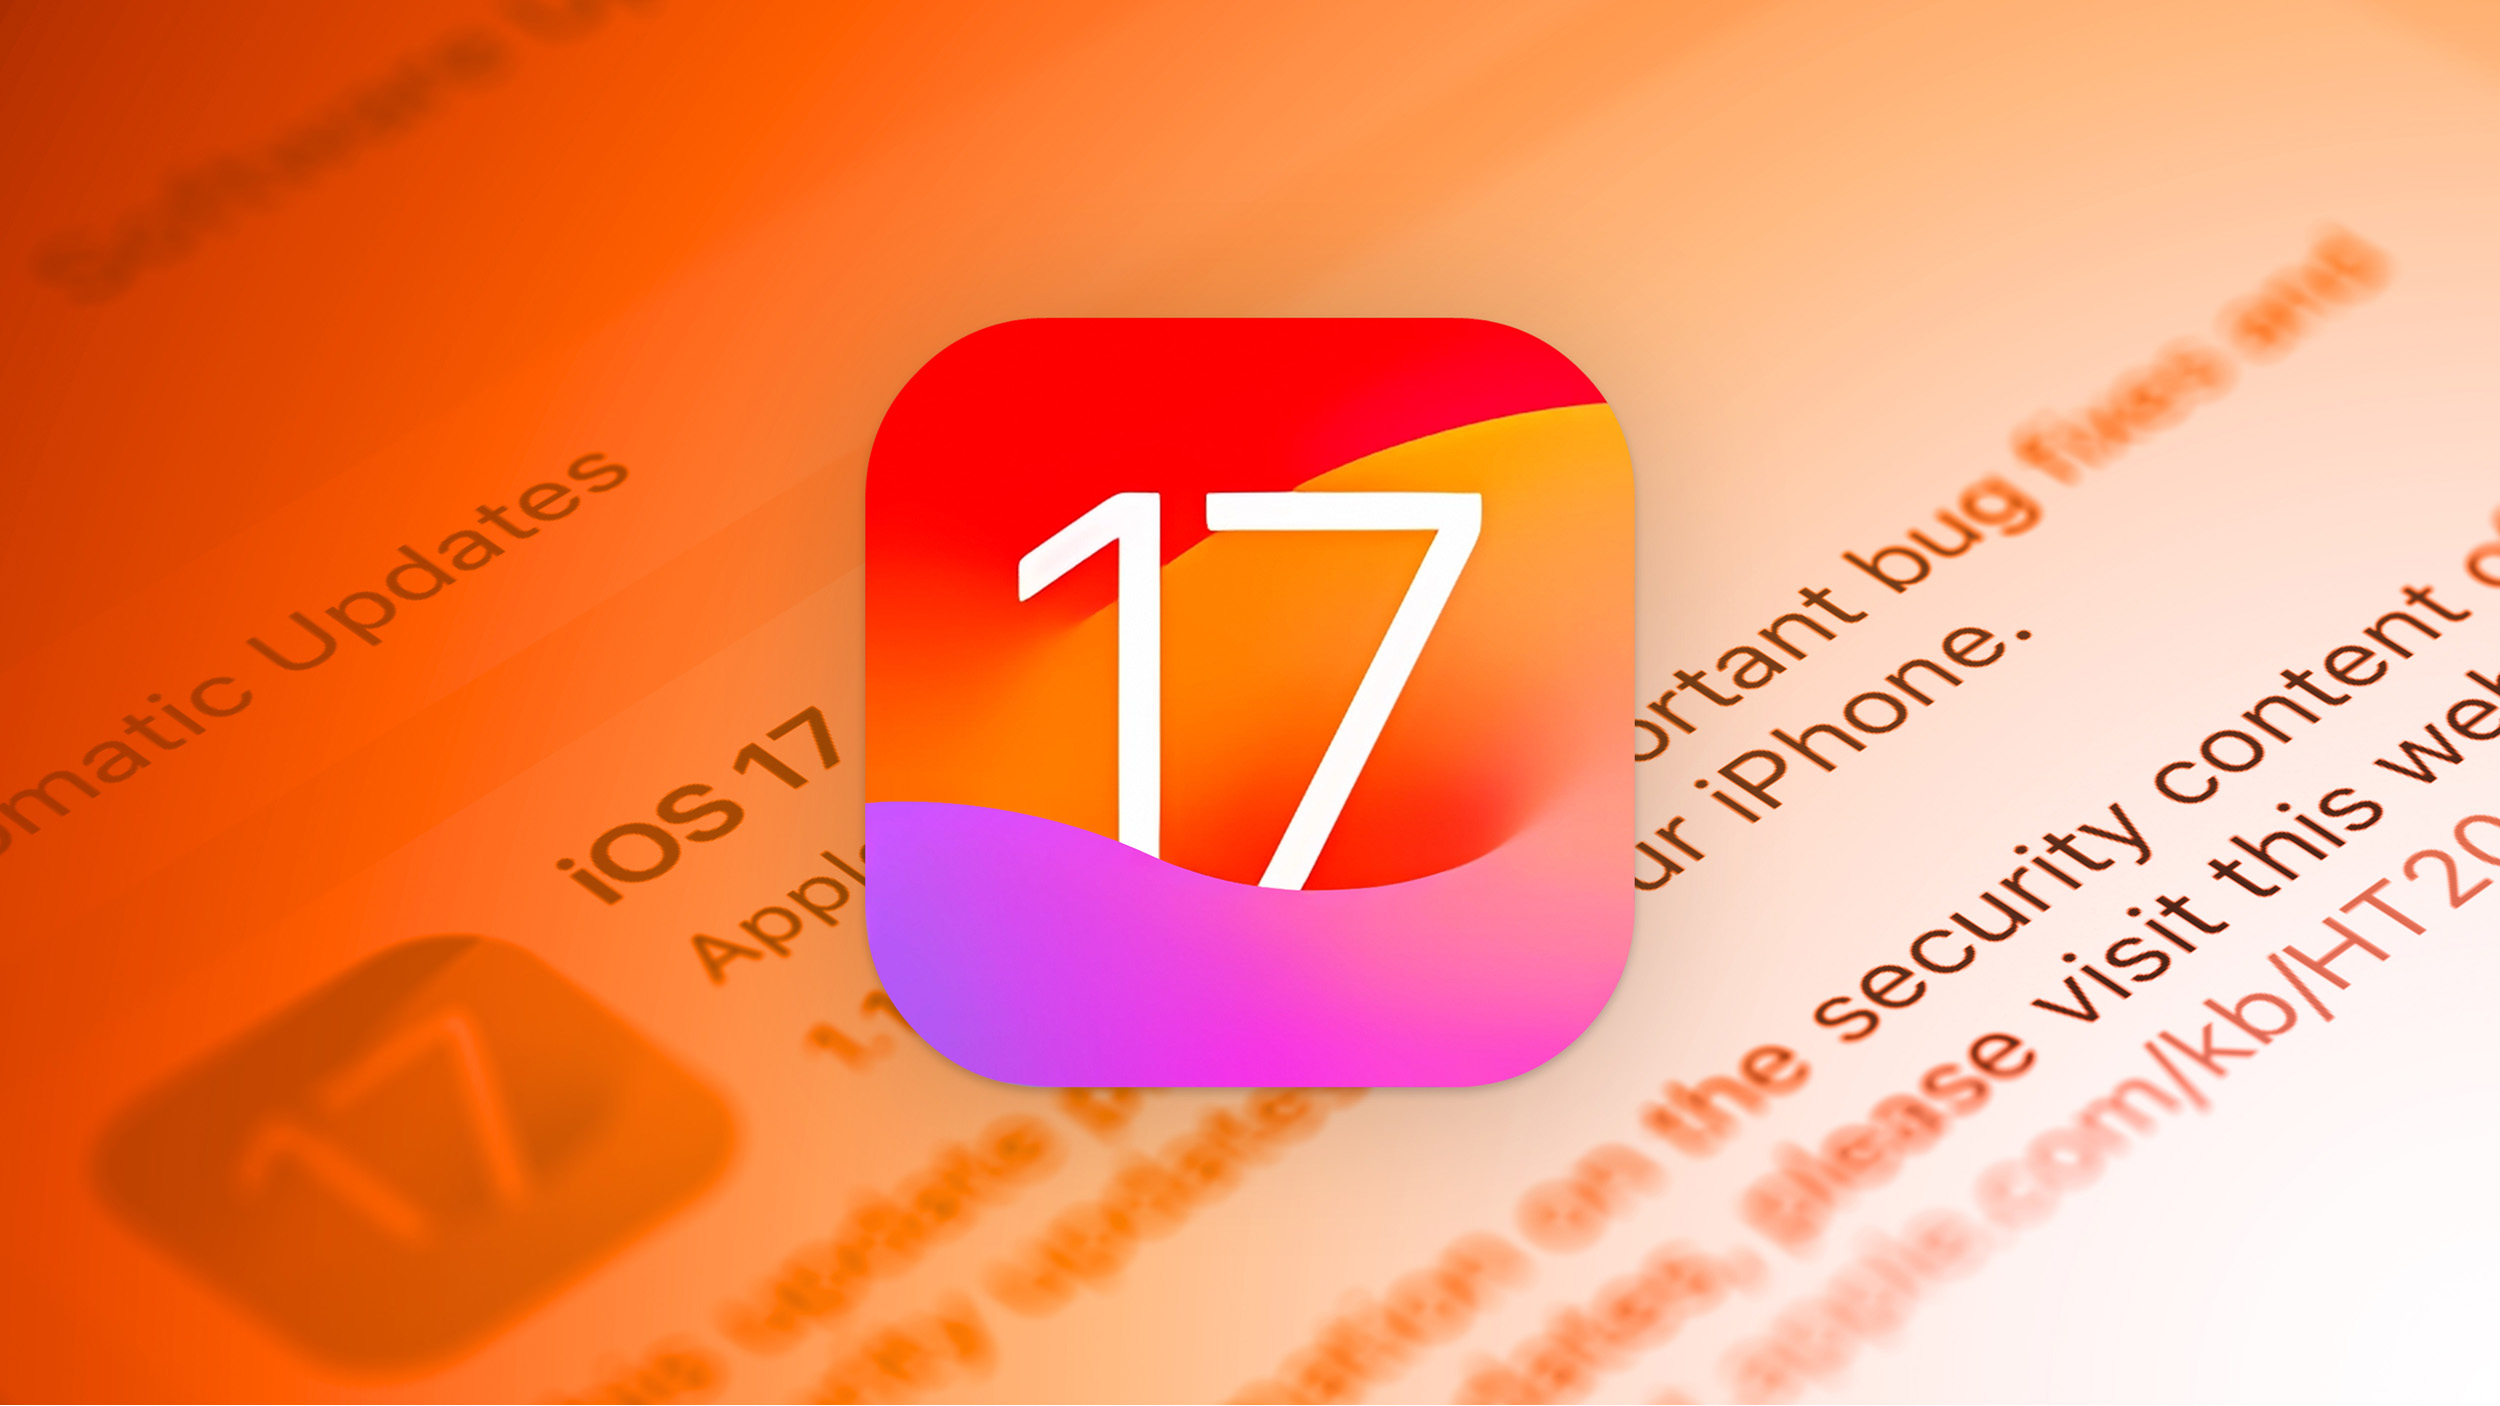 Just Install iOS 17? Here's 12 Things to Do First